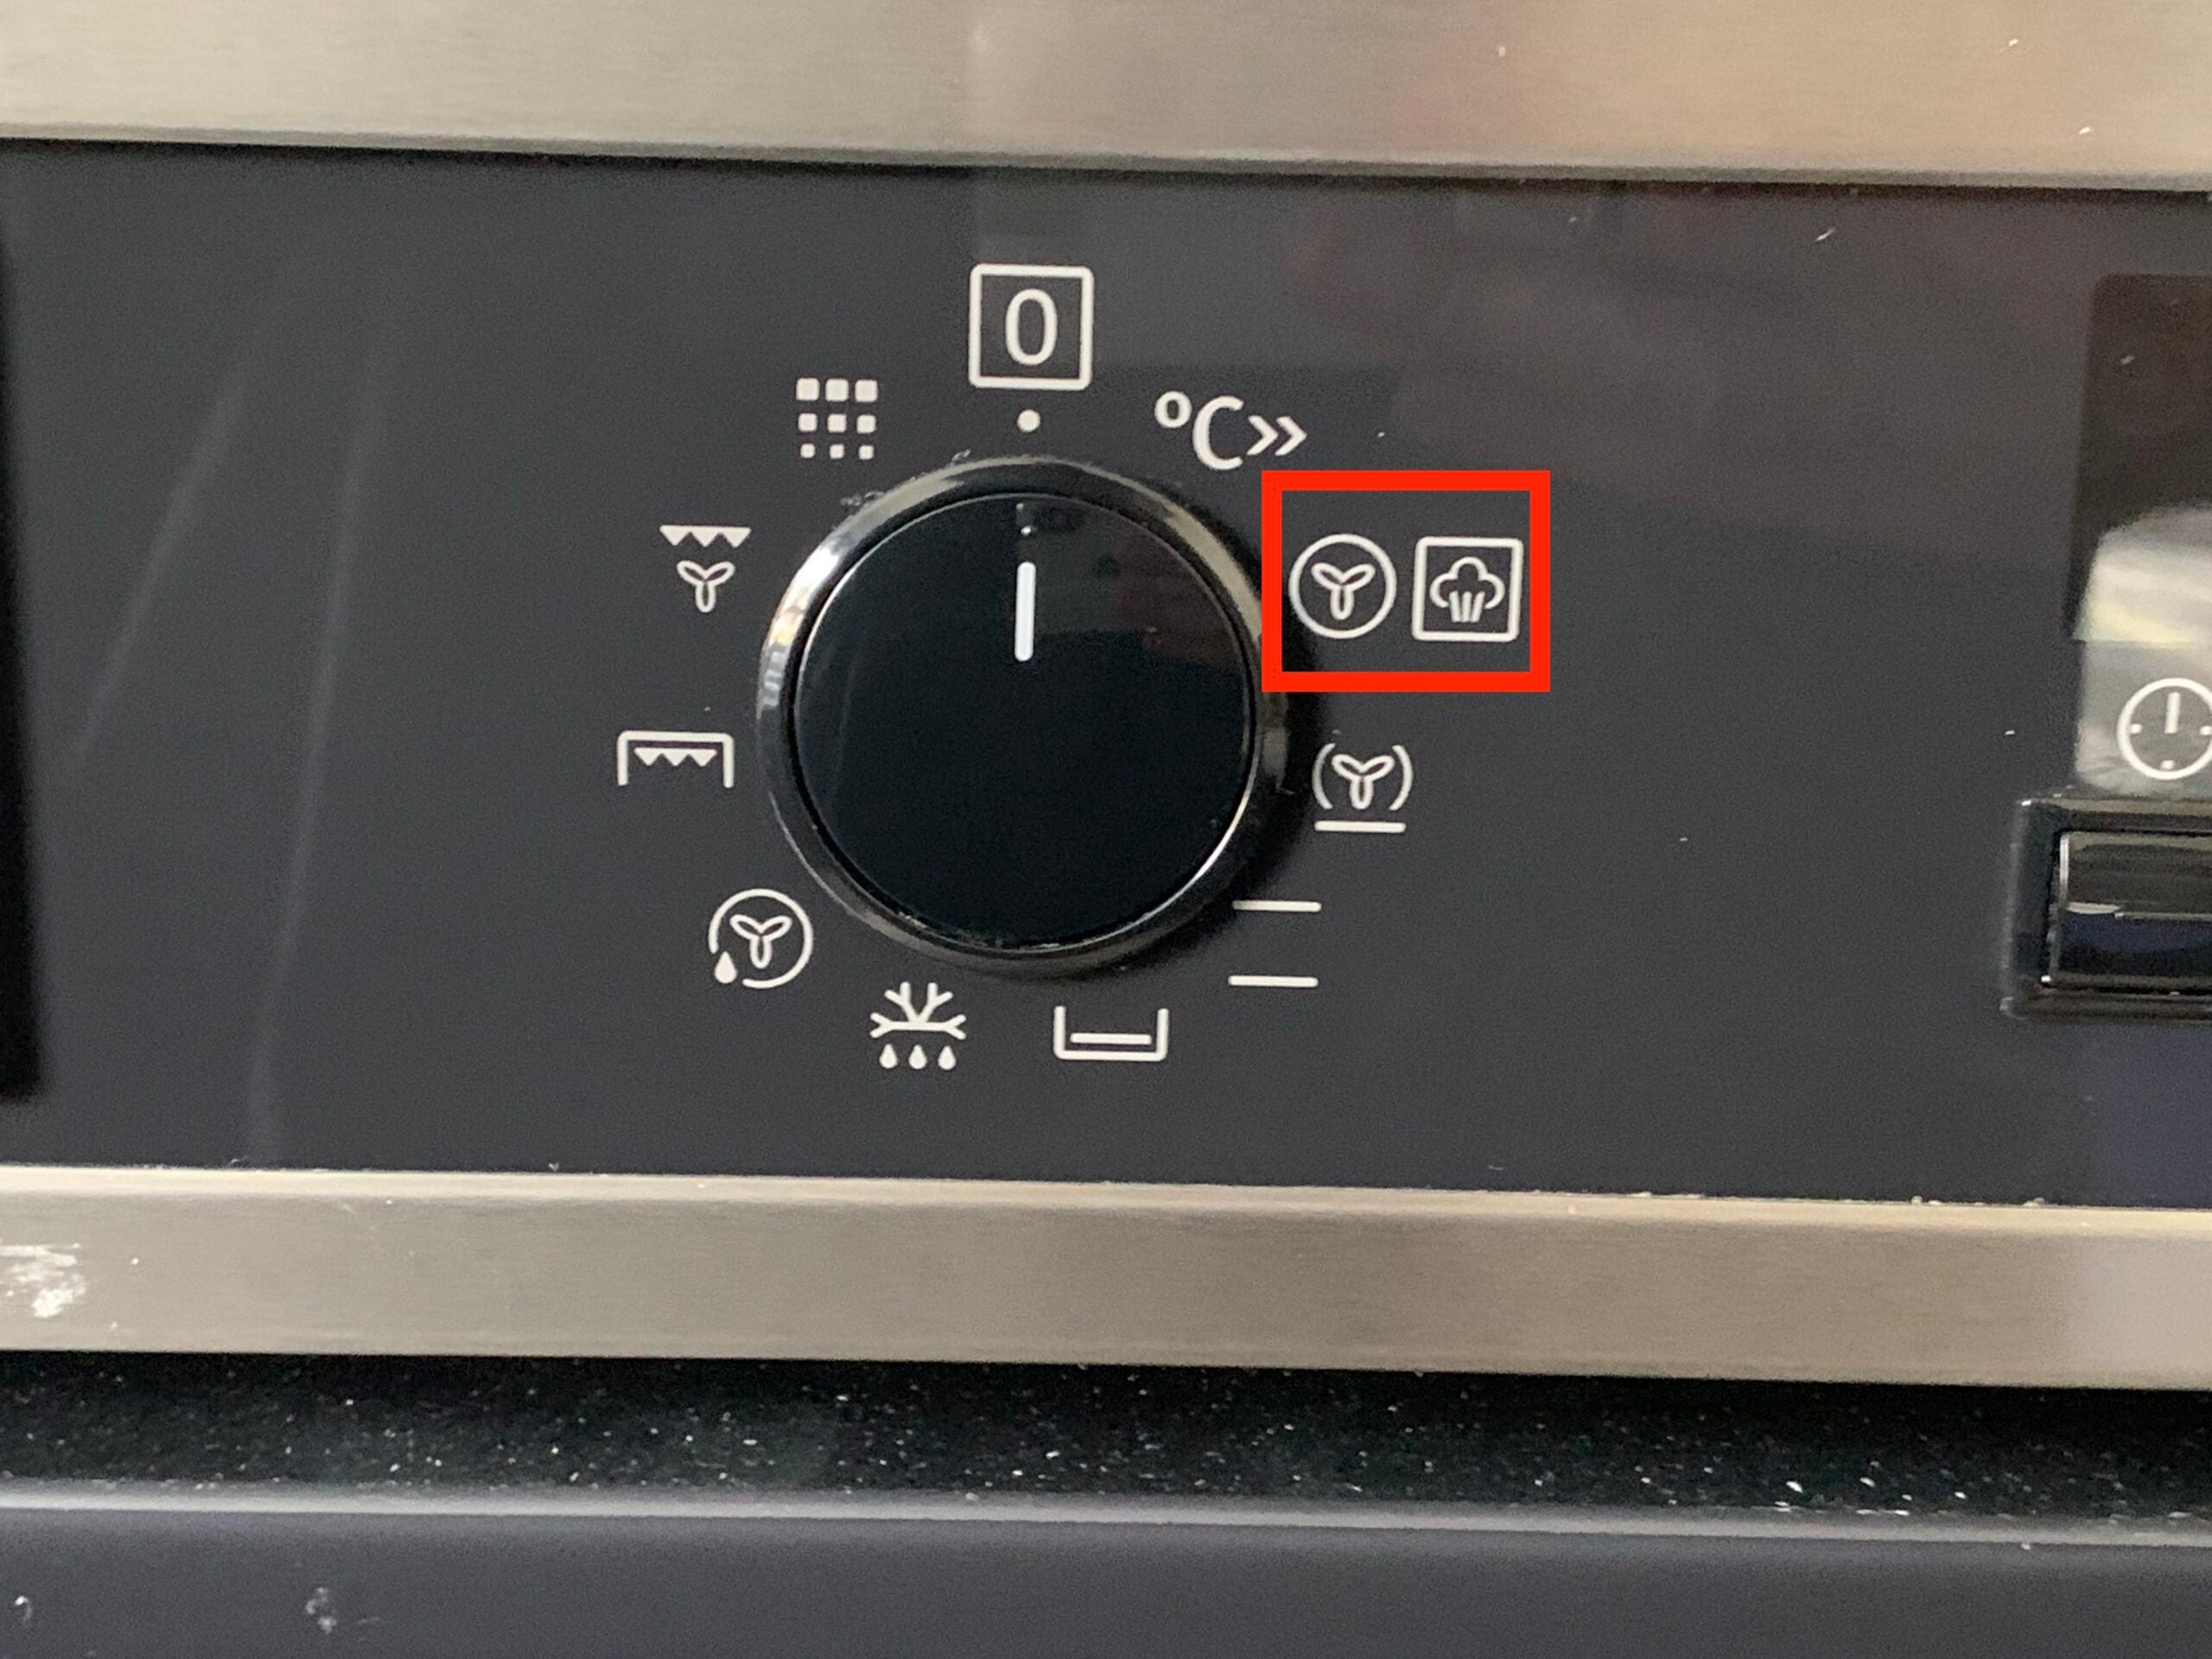 The Fan setting on an oven